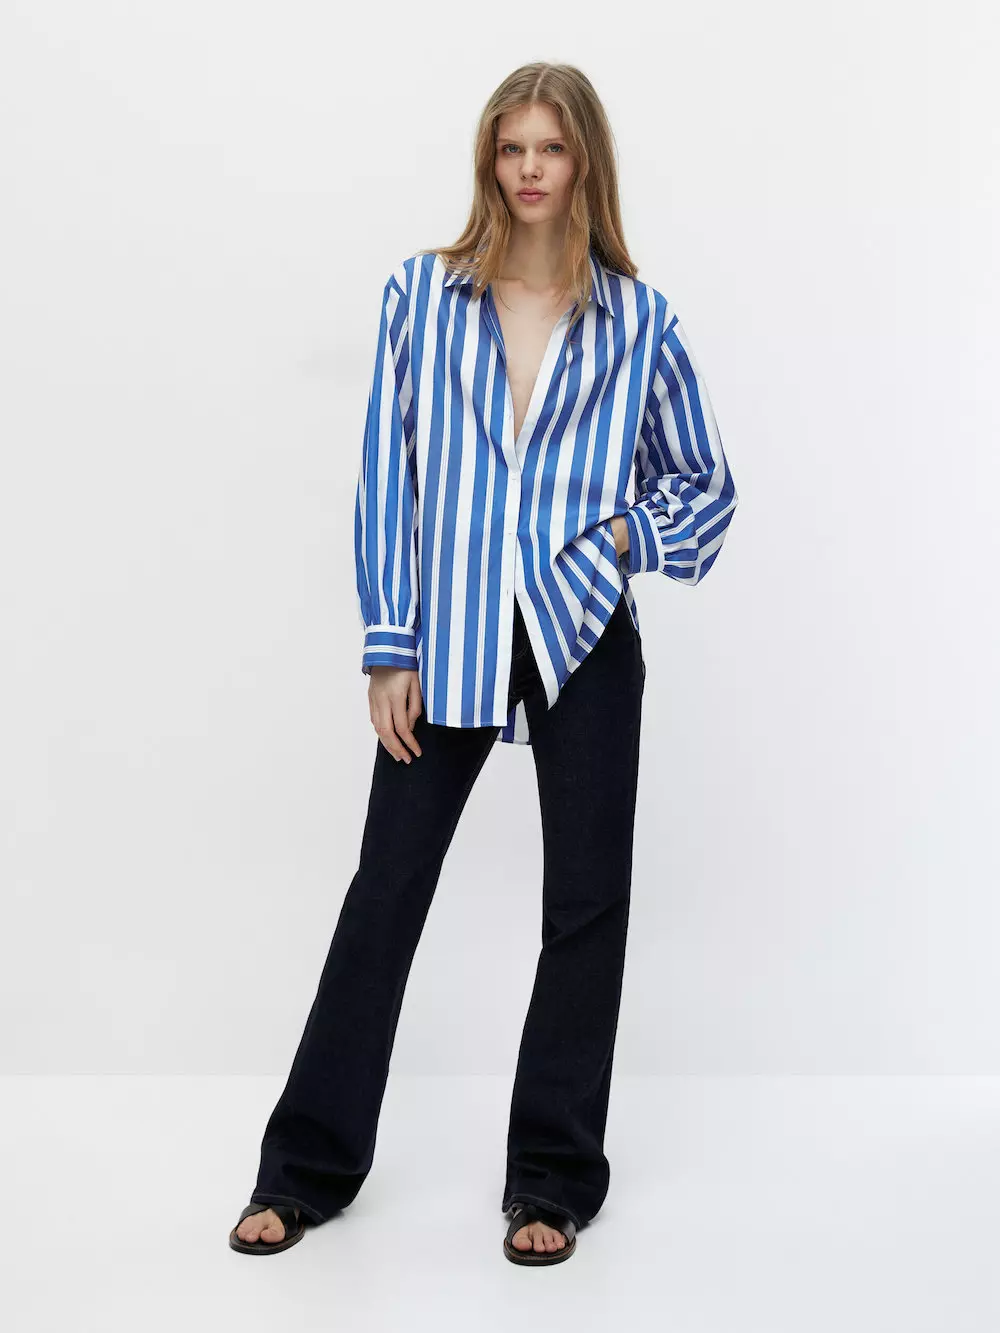 Straight striped jeans, £49.99, Mango - buy now